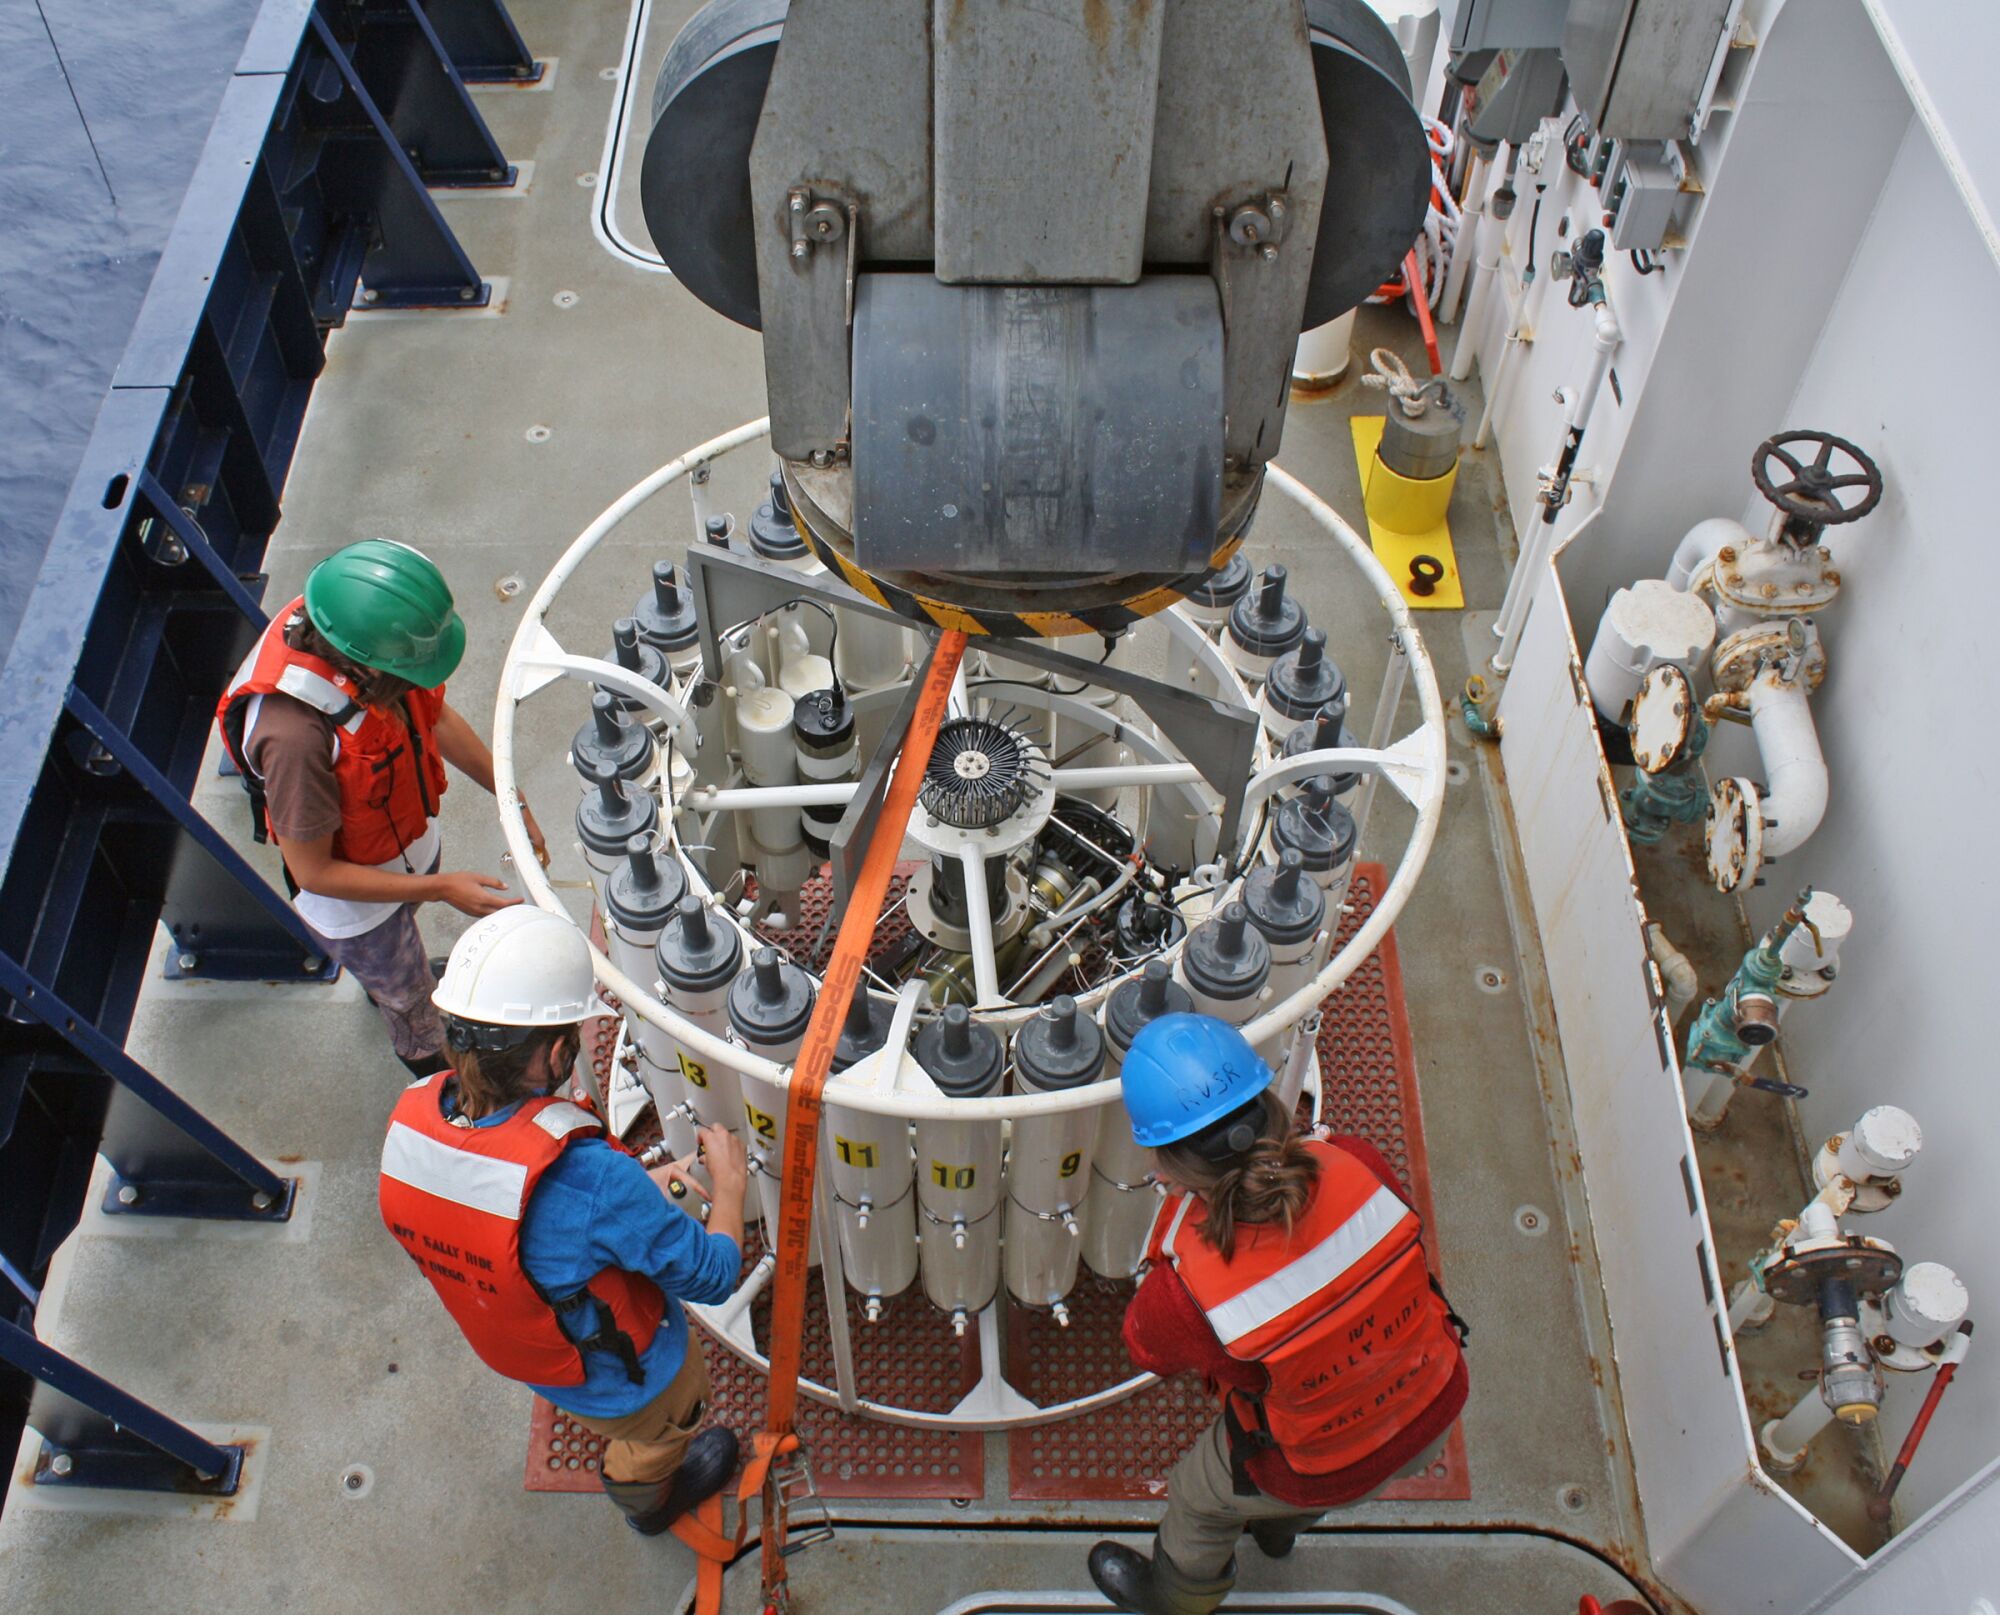 Members of the all women CalCOFI research team deploy equipment and working in labs aboard the ship.